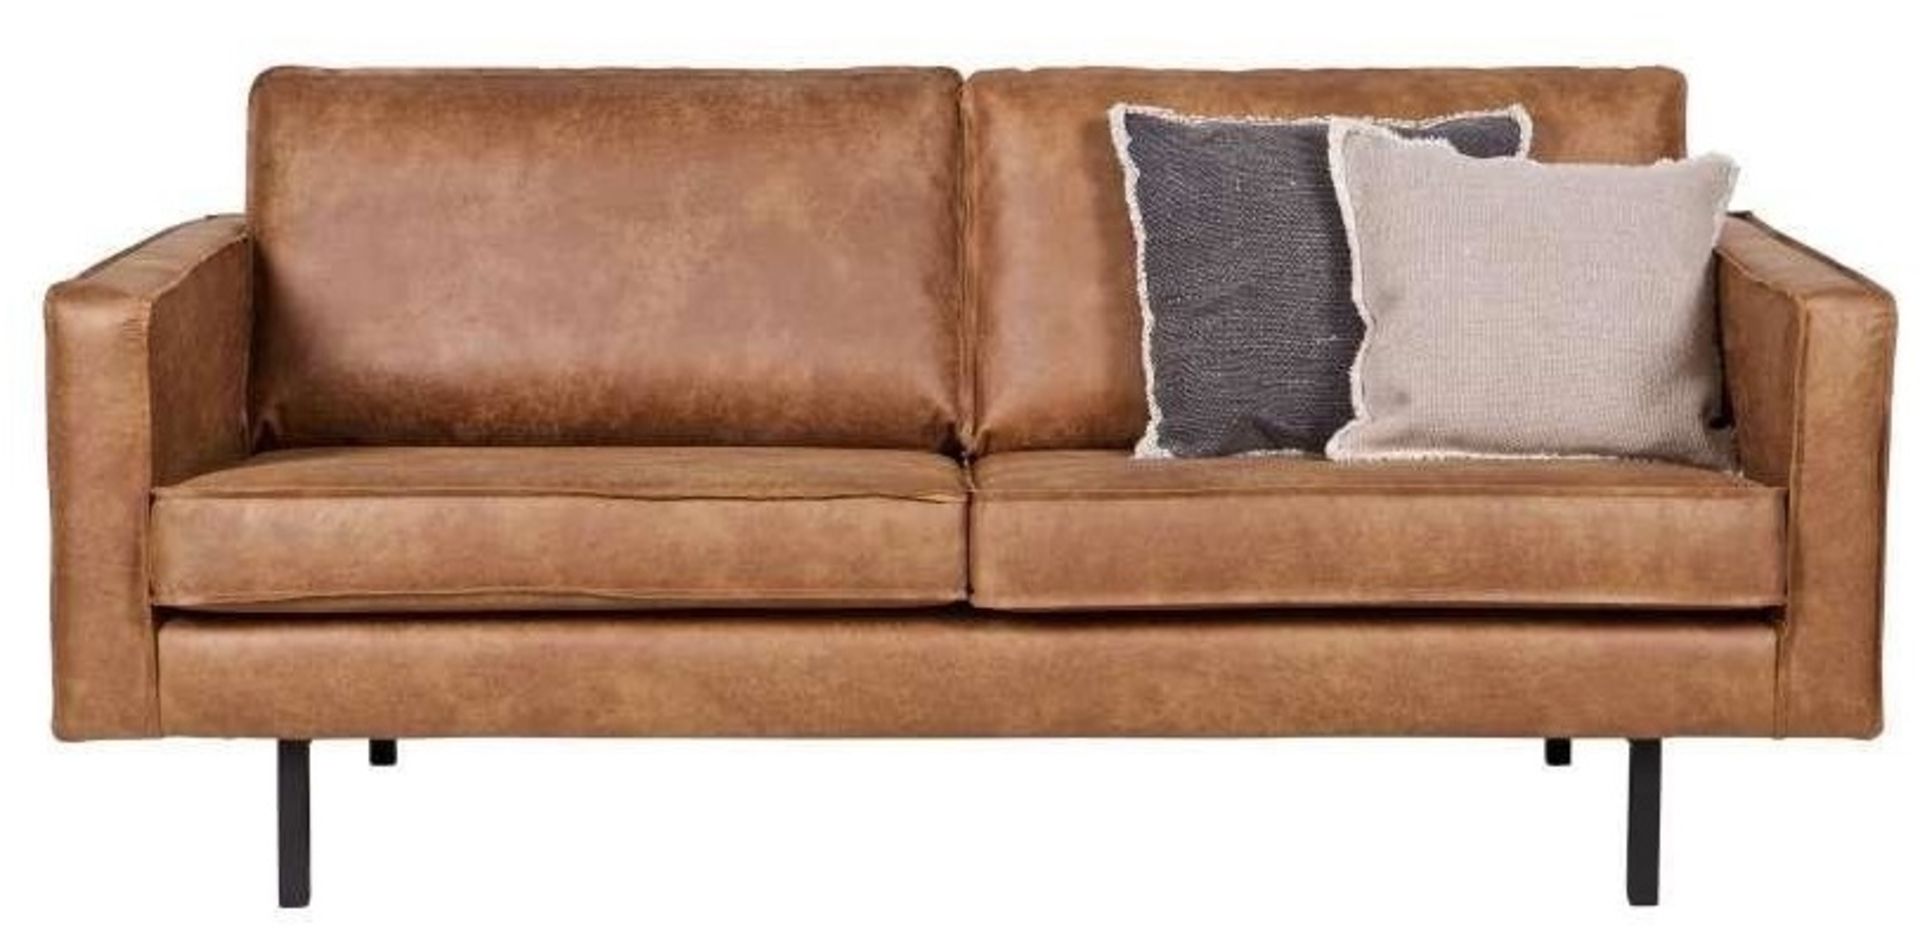 1 x 'Rodeo' Contemporary 2-Seater Leather Sofa In Cognac Brown - Dimensions: H85xW190xH86cm - Image 3 of 4